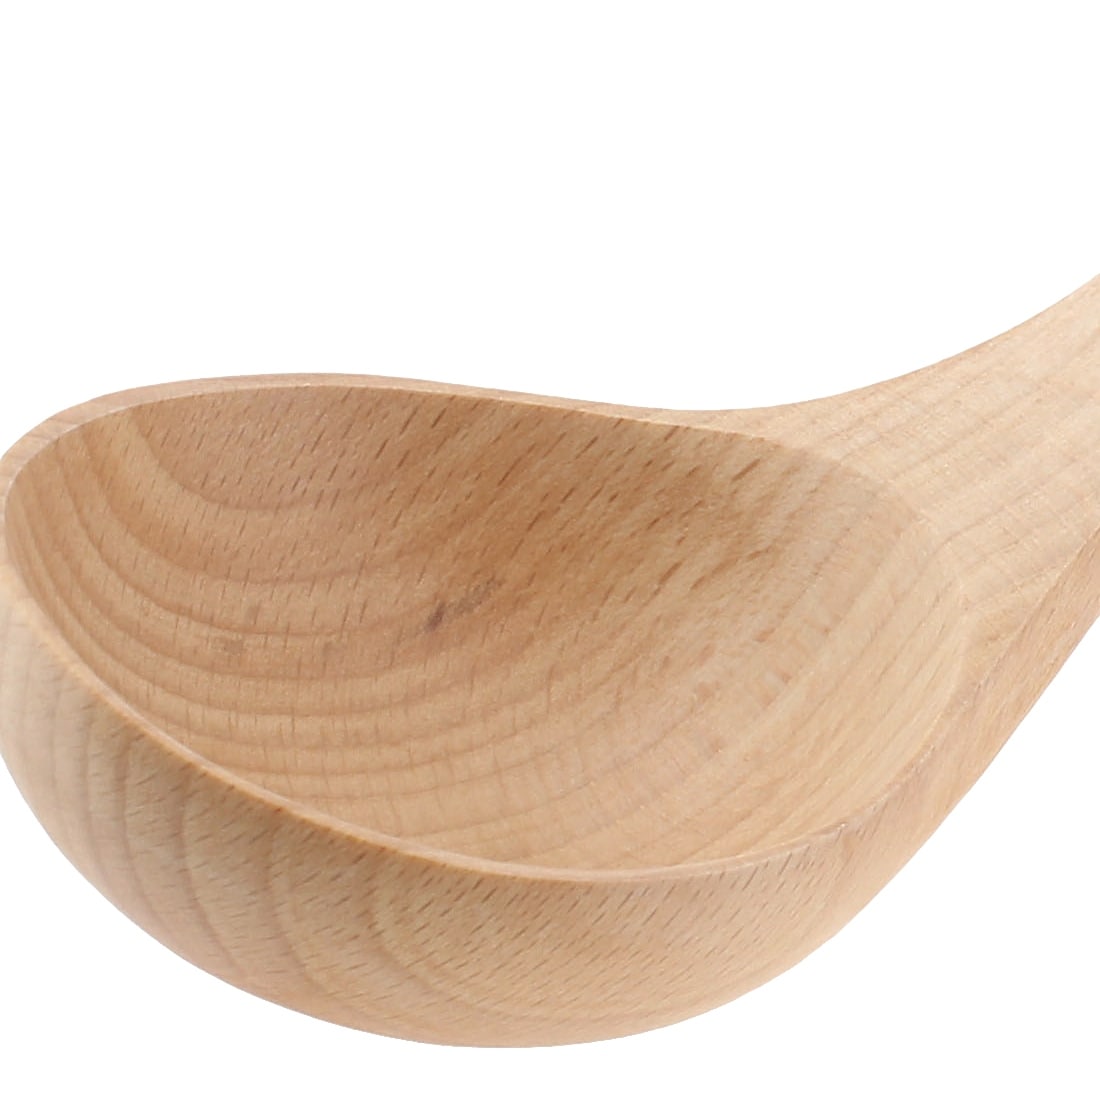 Wooden Ladle Spoons Natural Grain Kitchen Soup Spoon Dining Spoons 8" - Wooden Color